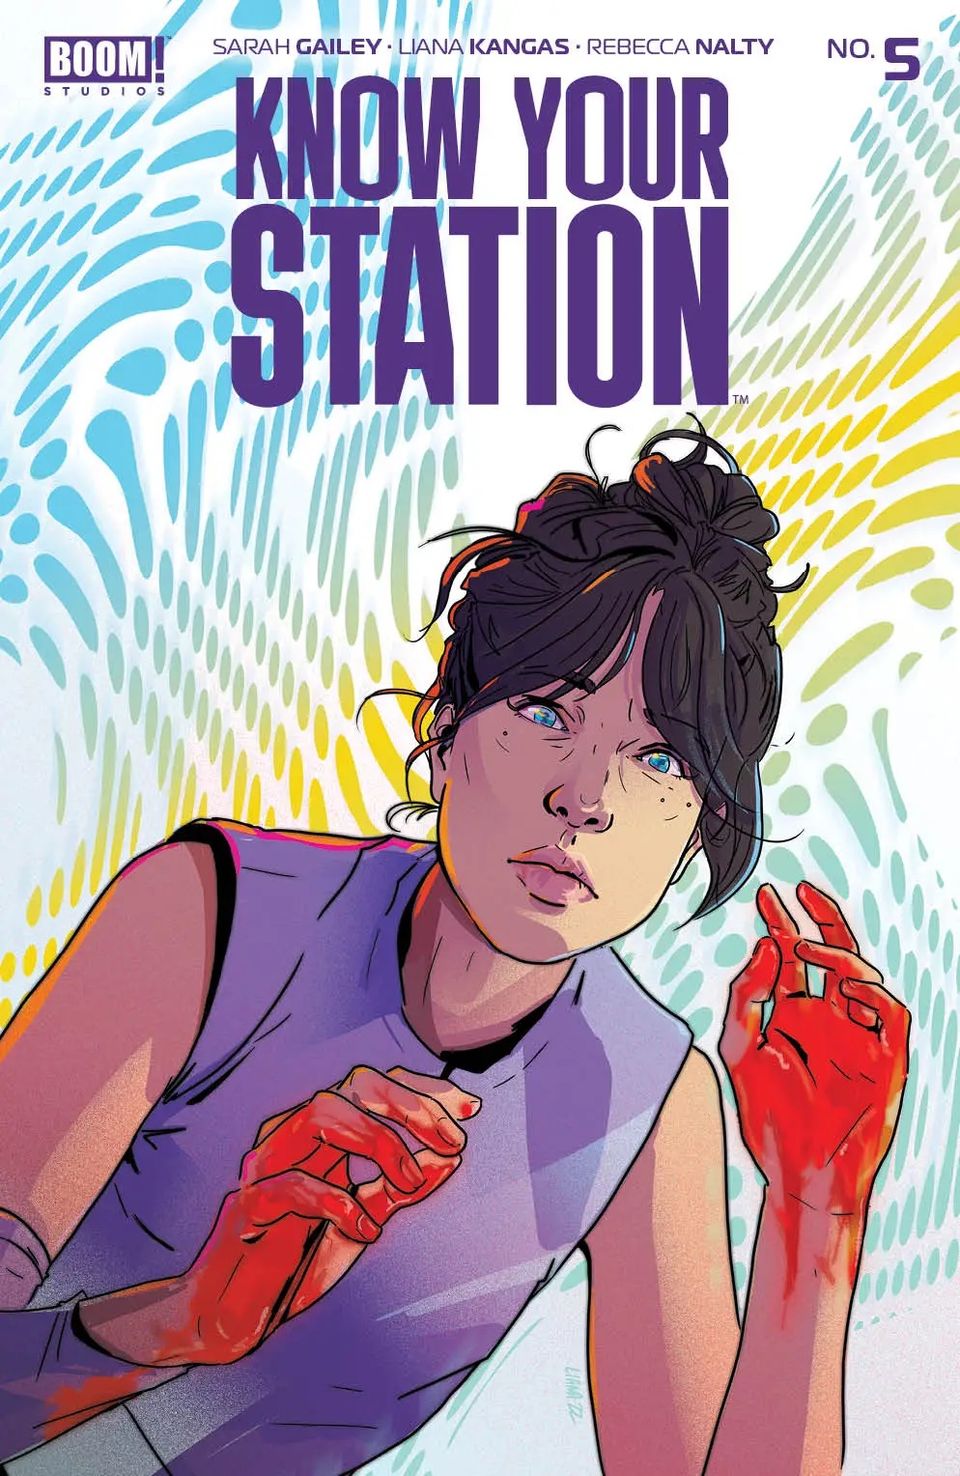 KNOW YOUR STATION #5 Available Tomorrow!